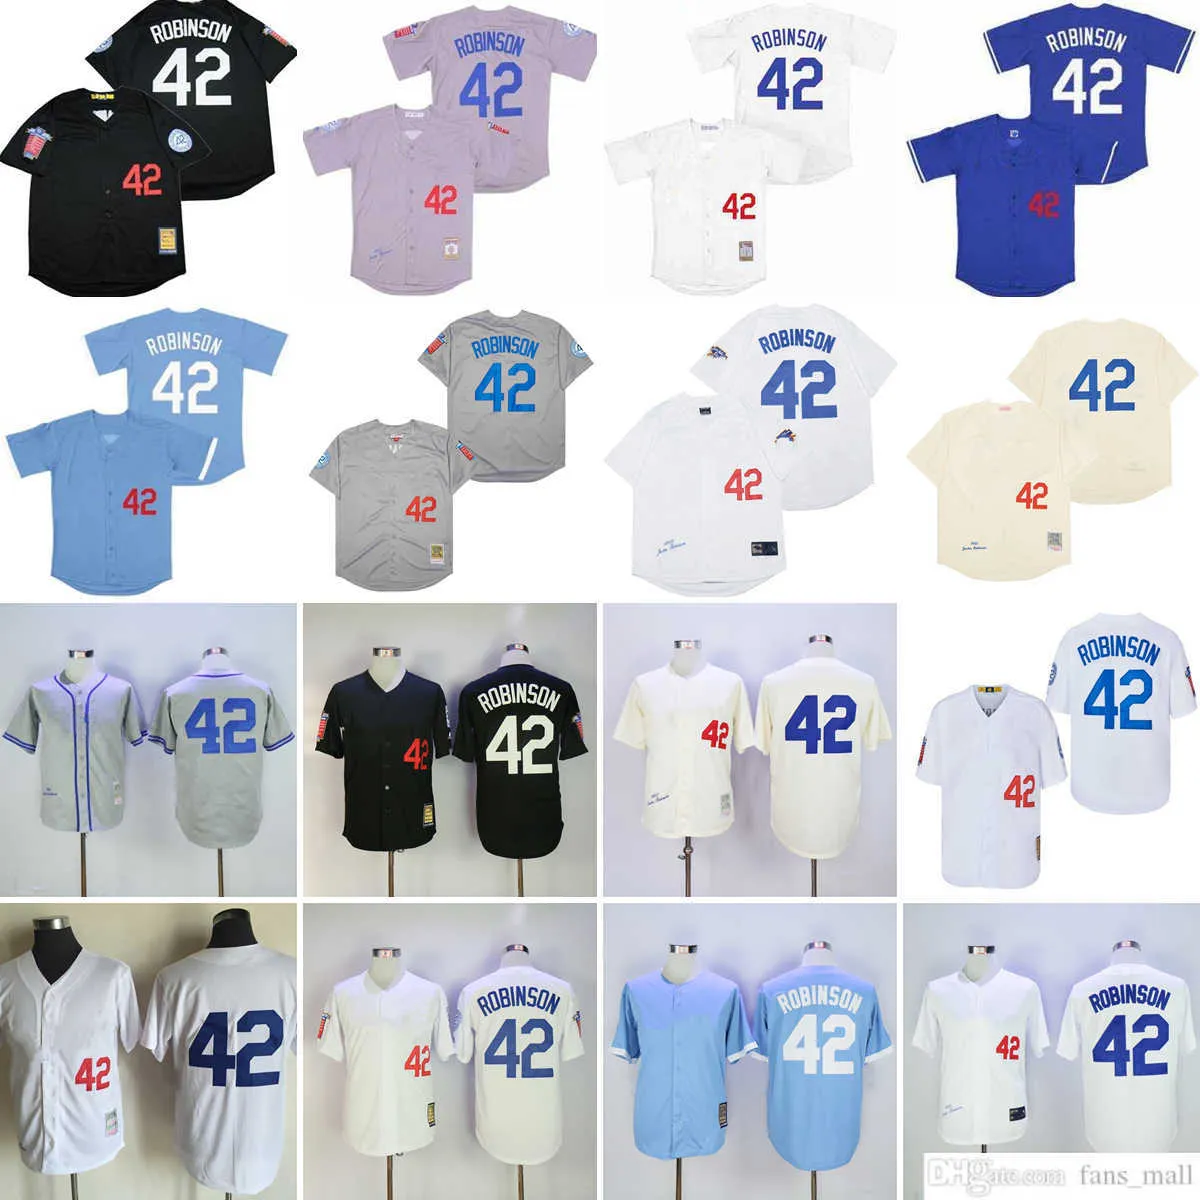 Mitchell and Ness Vintage Baseball 42 Jackie Robinson Jerseys NCAA Ed Spreatable Sport Gray 1963 Cream 1955 White 1959 1981 Blue Pulover